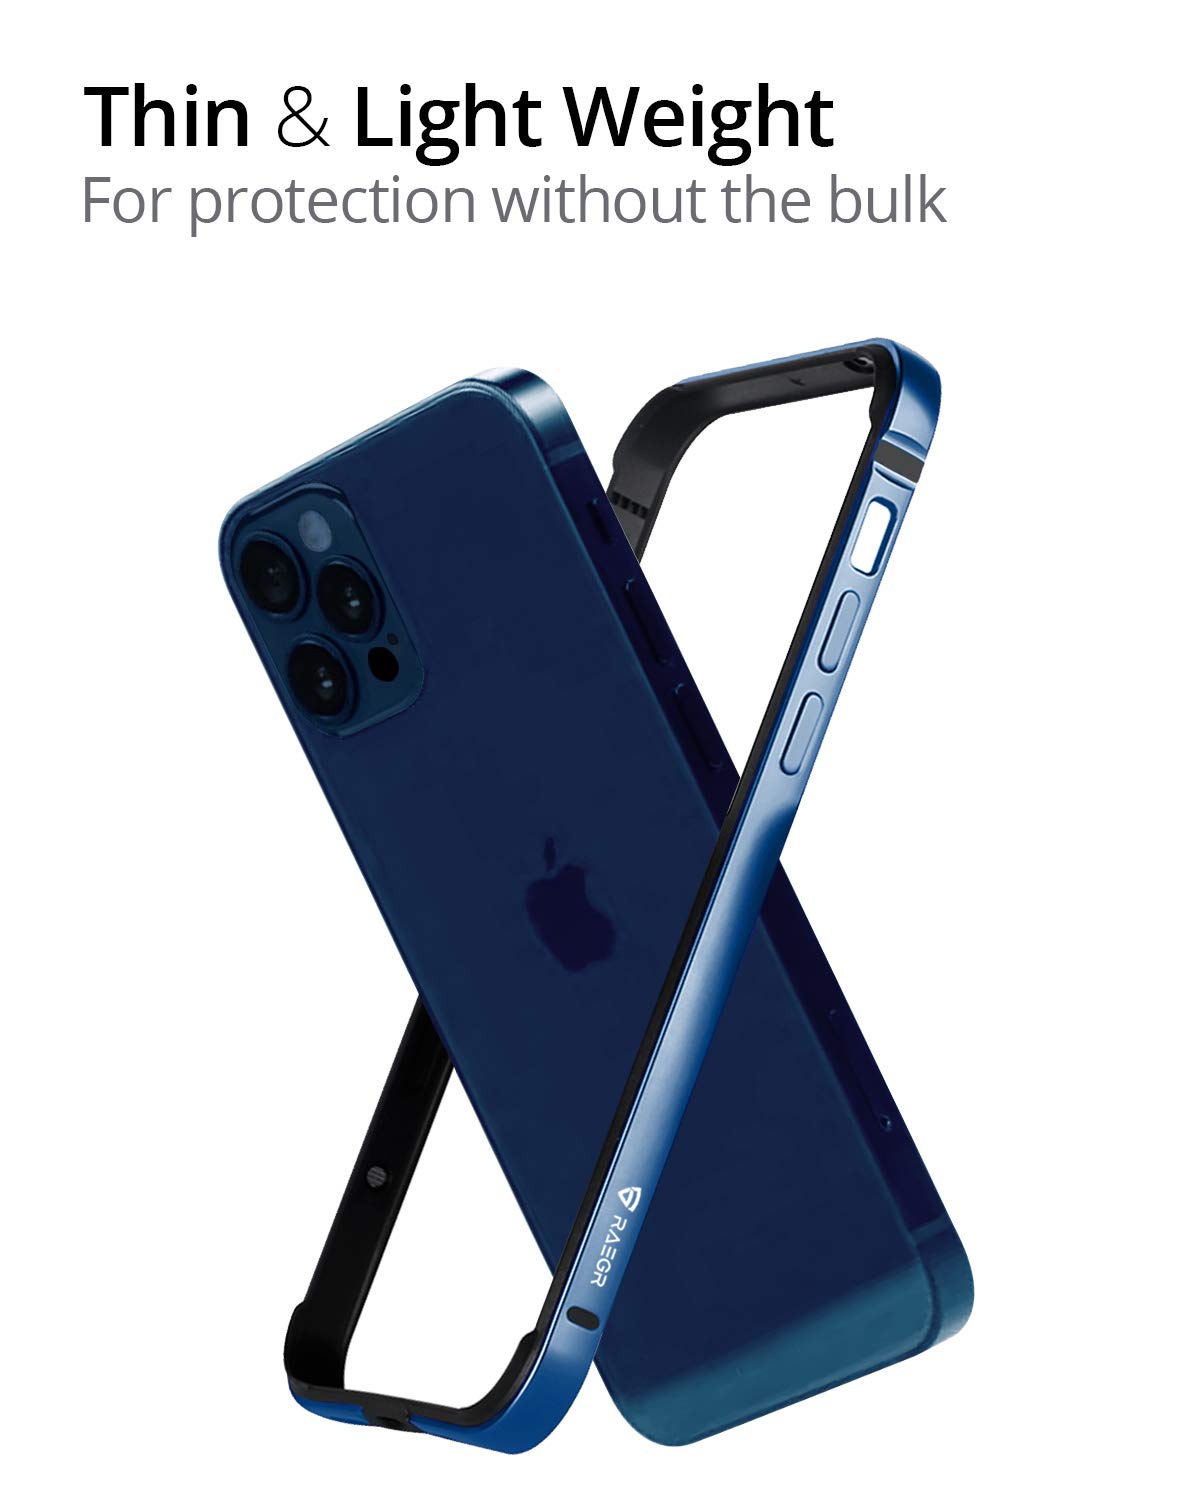 RAEGR iPhone 12 Pro Max 5G Anodized Aluminum Bumper Case, Supports Mag-Safe Wireless Charging 6.7